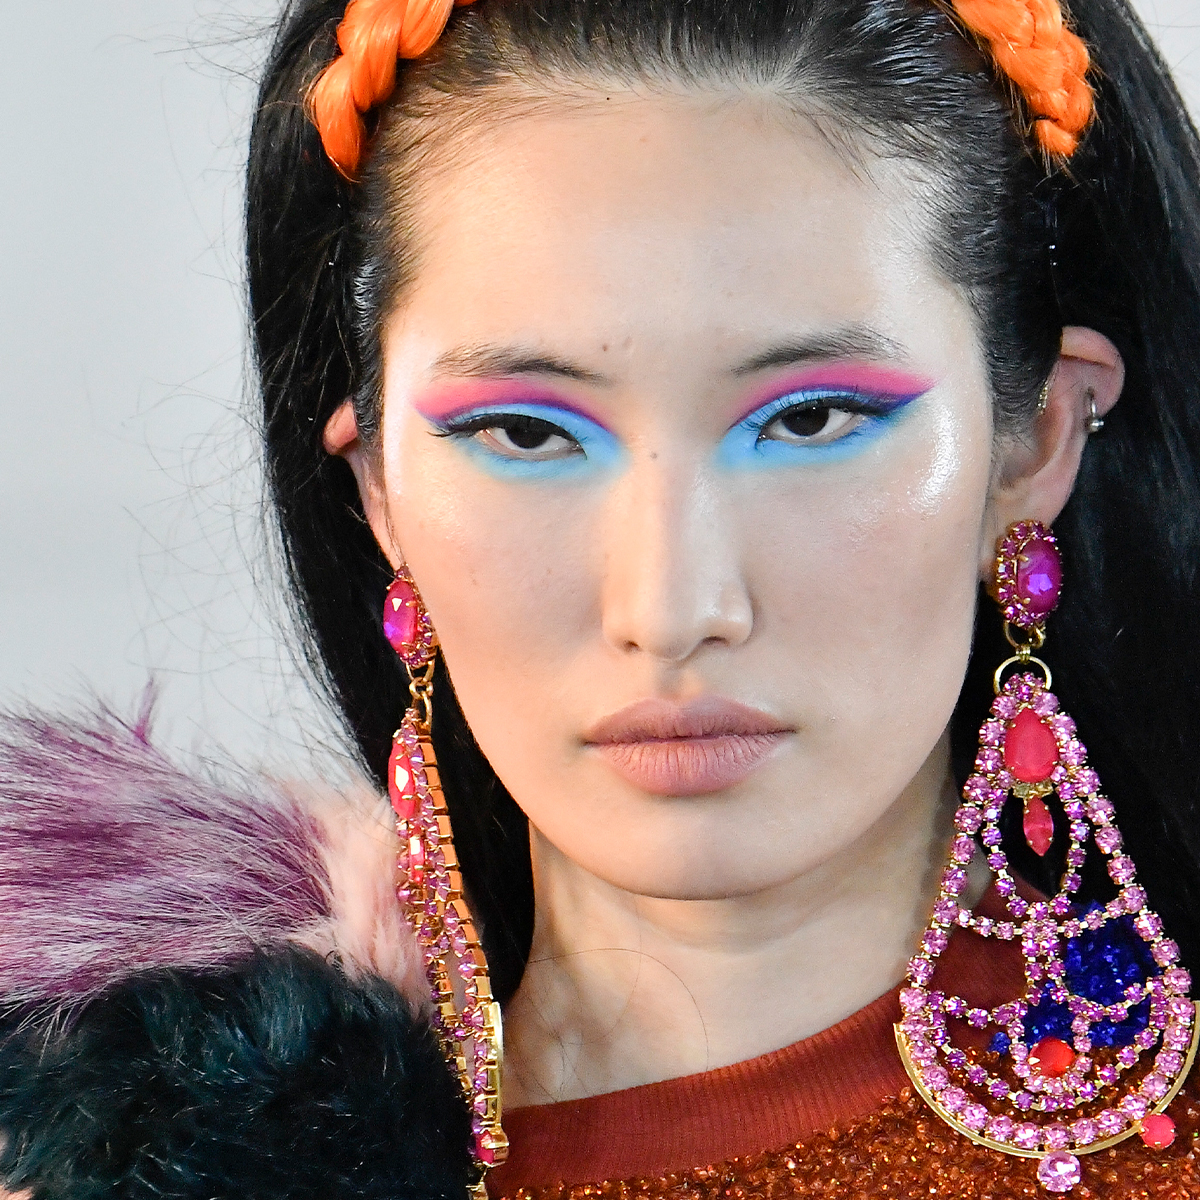 The 7 Biggest Fall/Winter Beauty Trends of 2020